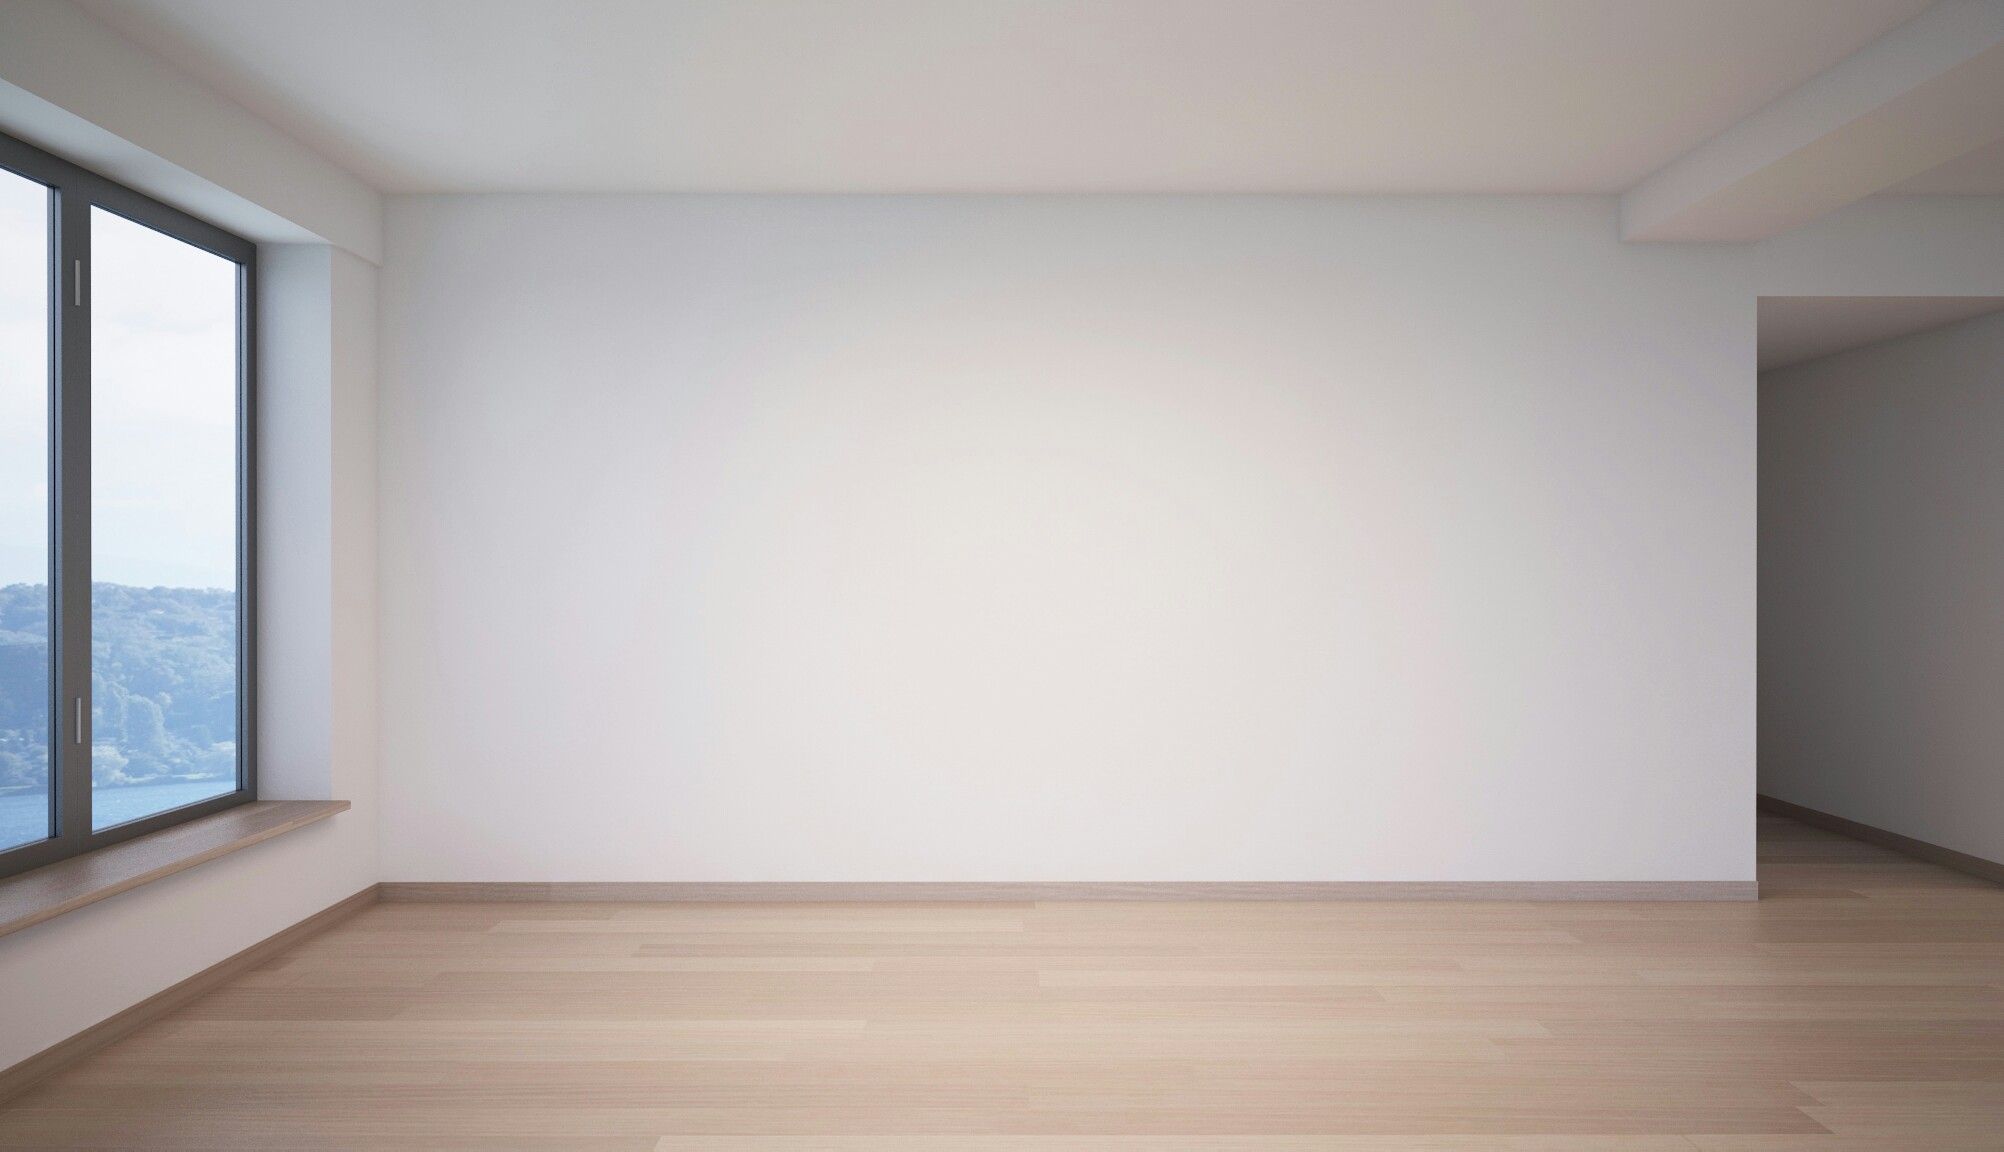 Free photo: Empty room - Architecture, Ceiling, Frames - Free Download ...